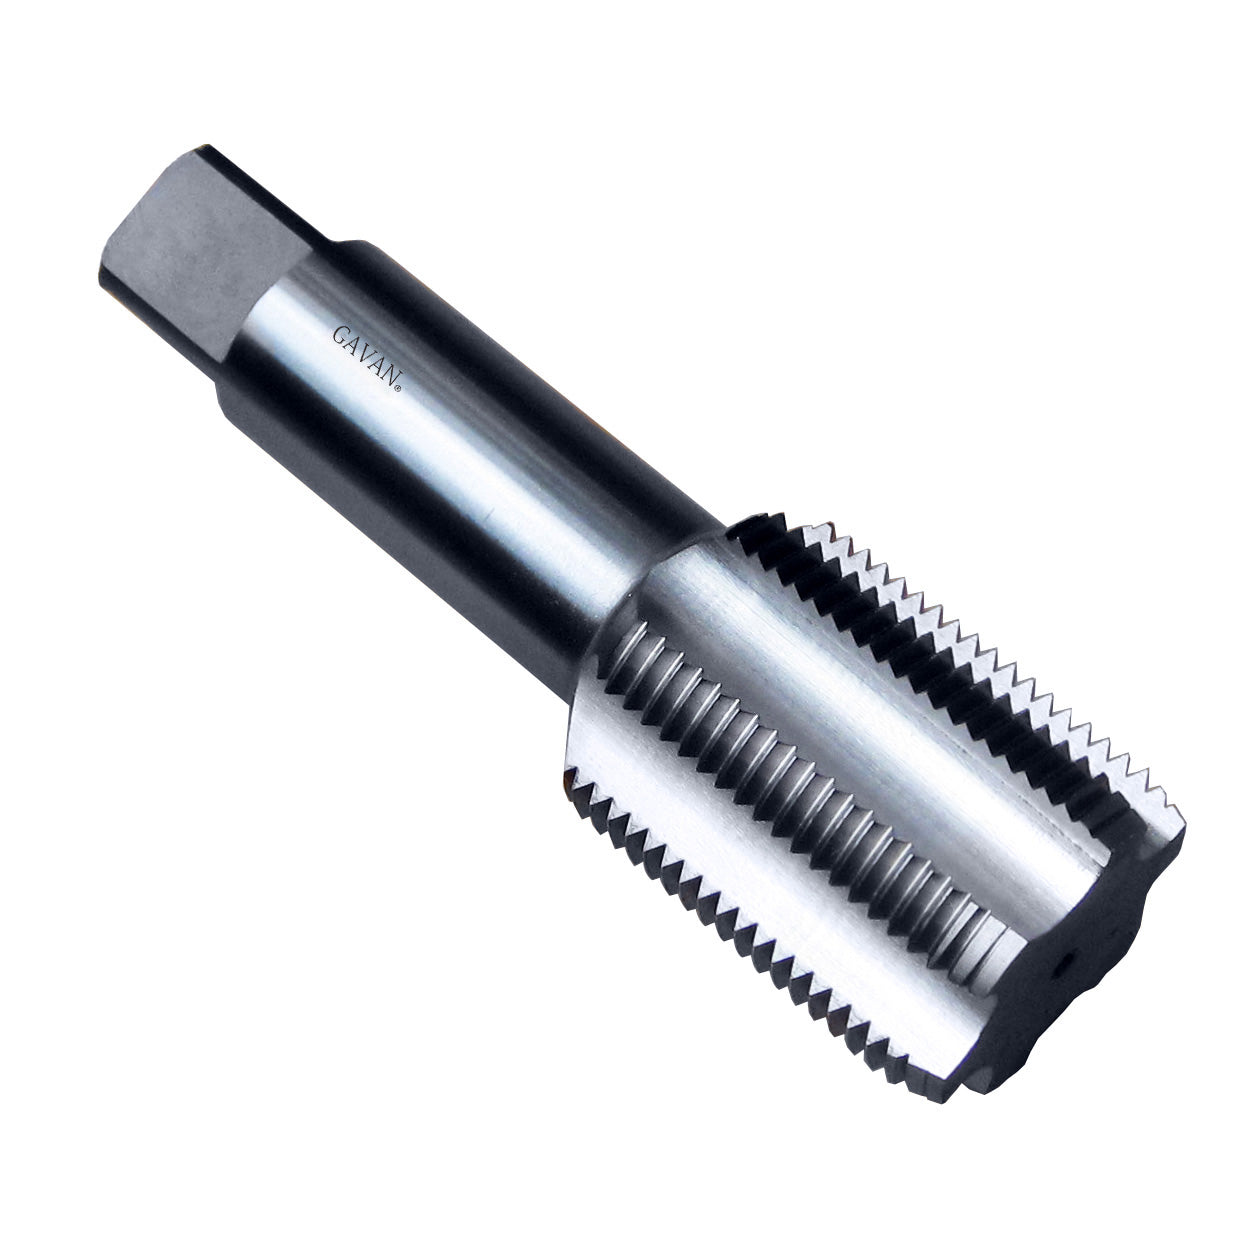 1 7/8" - 14 HSS Unified Right Hand Thread Tap